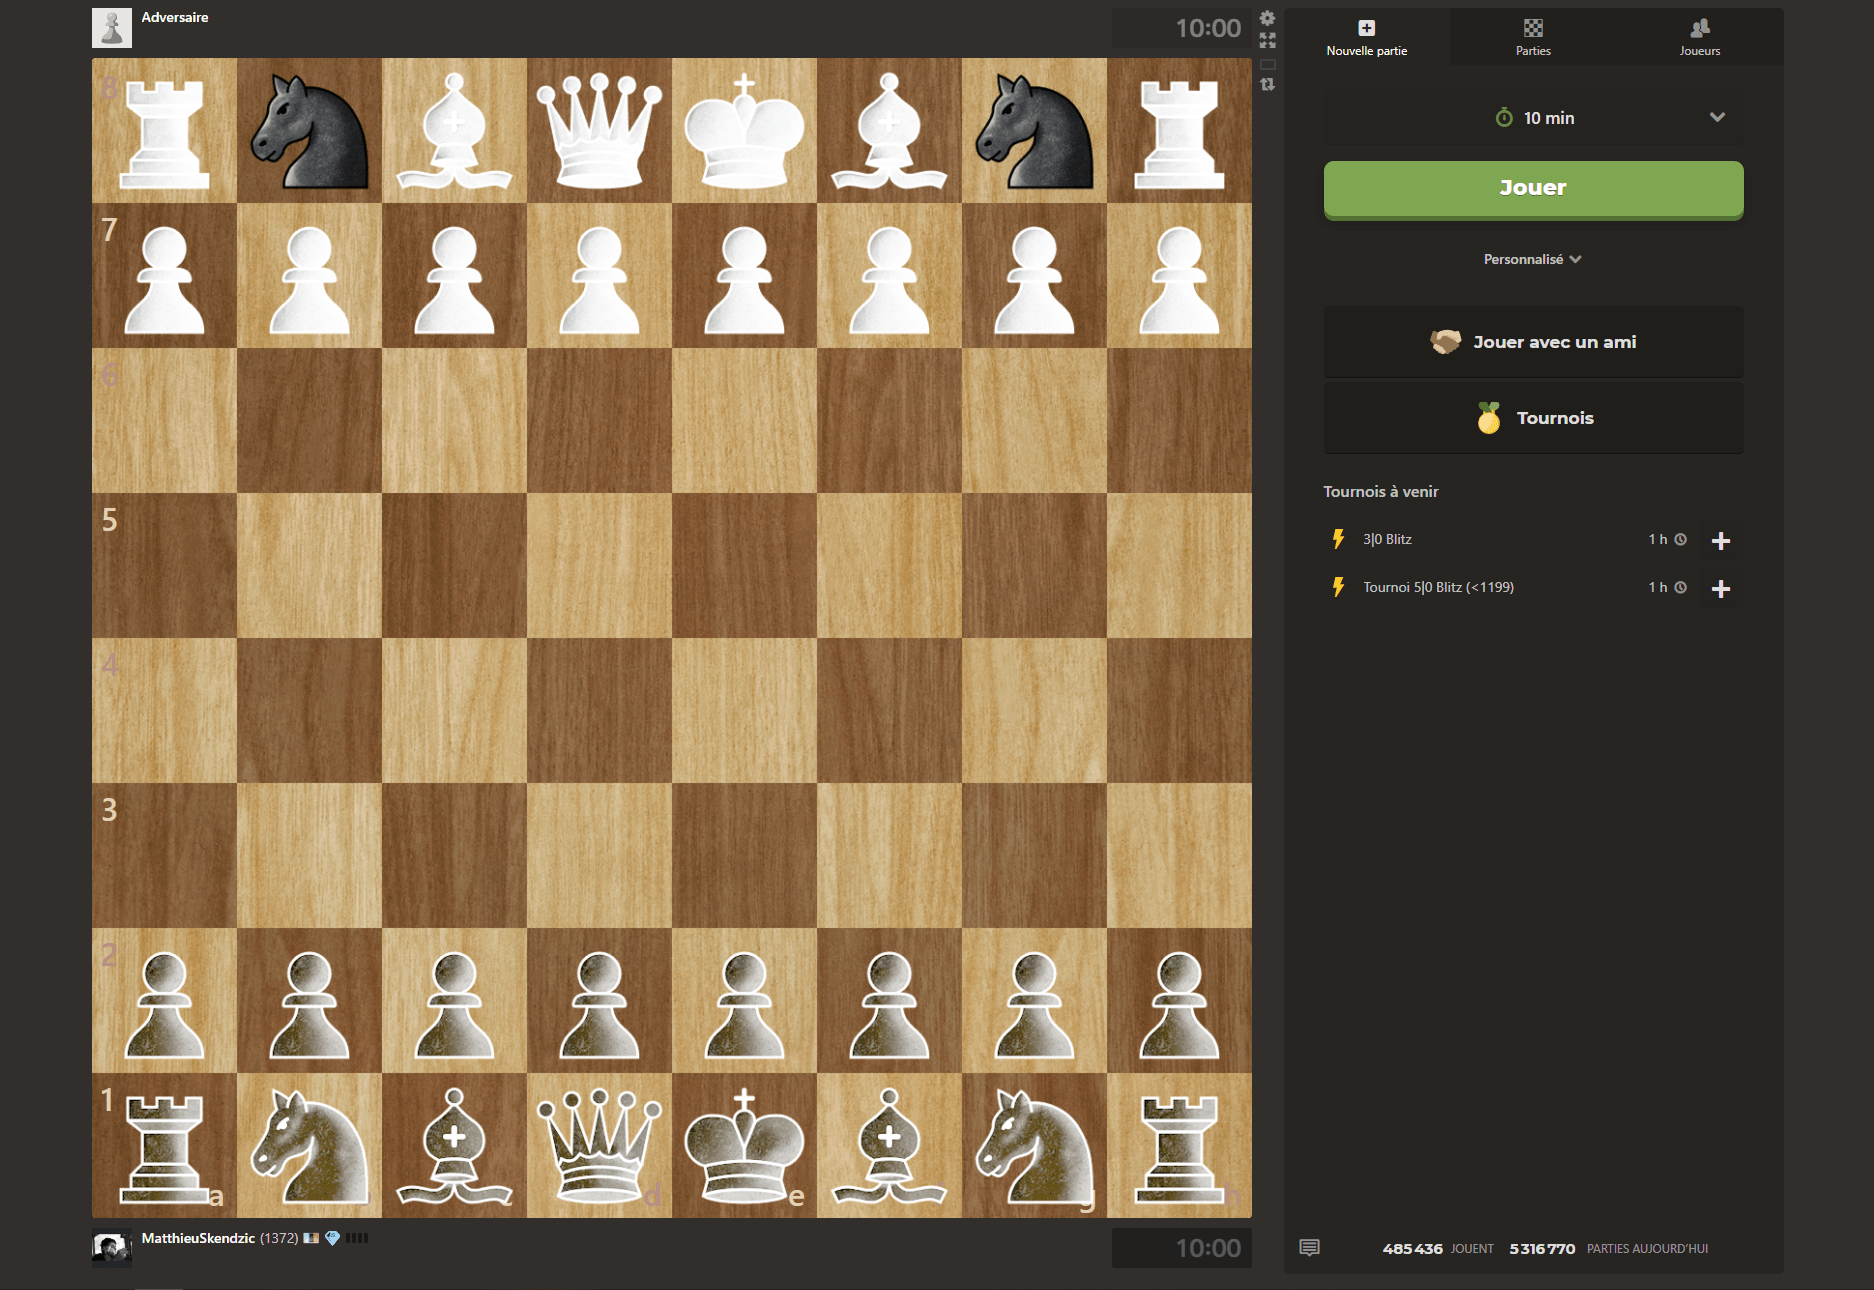 how do you get the game png??? - Chess Forums 